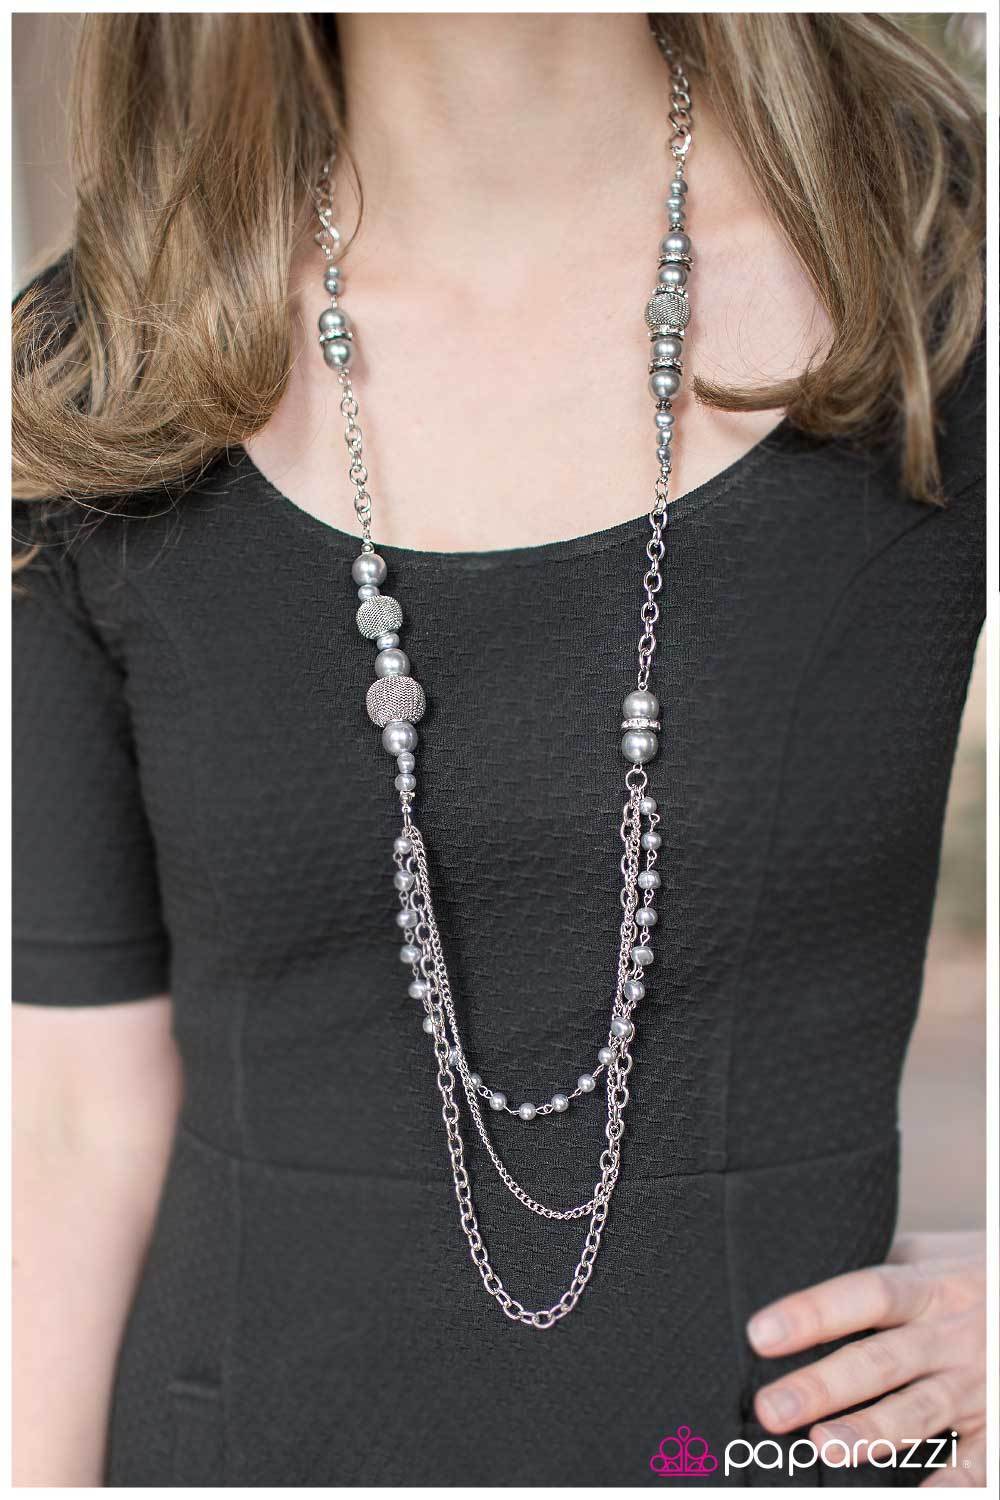 Enmeshed in Elegance Long Silver Necklace and matching Earrings - Paparazzi Accessories - model -CarasShop.com - $5 Jewelry by Cara Jewels